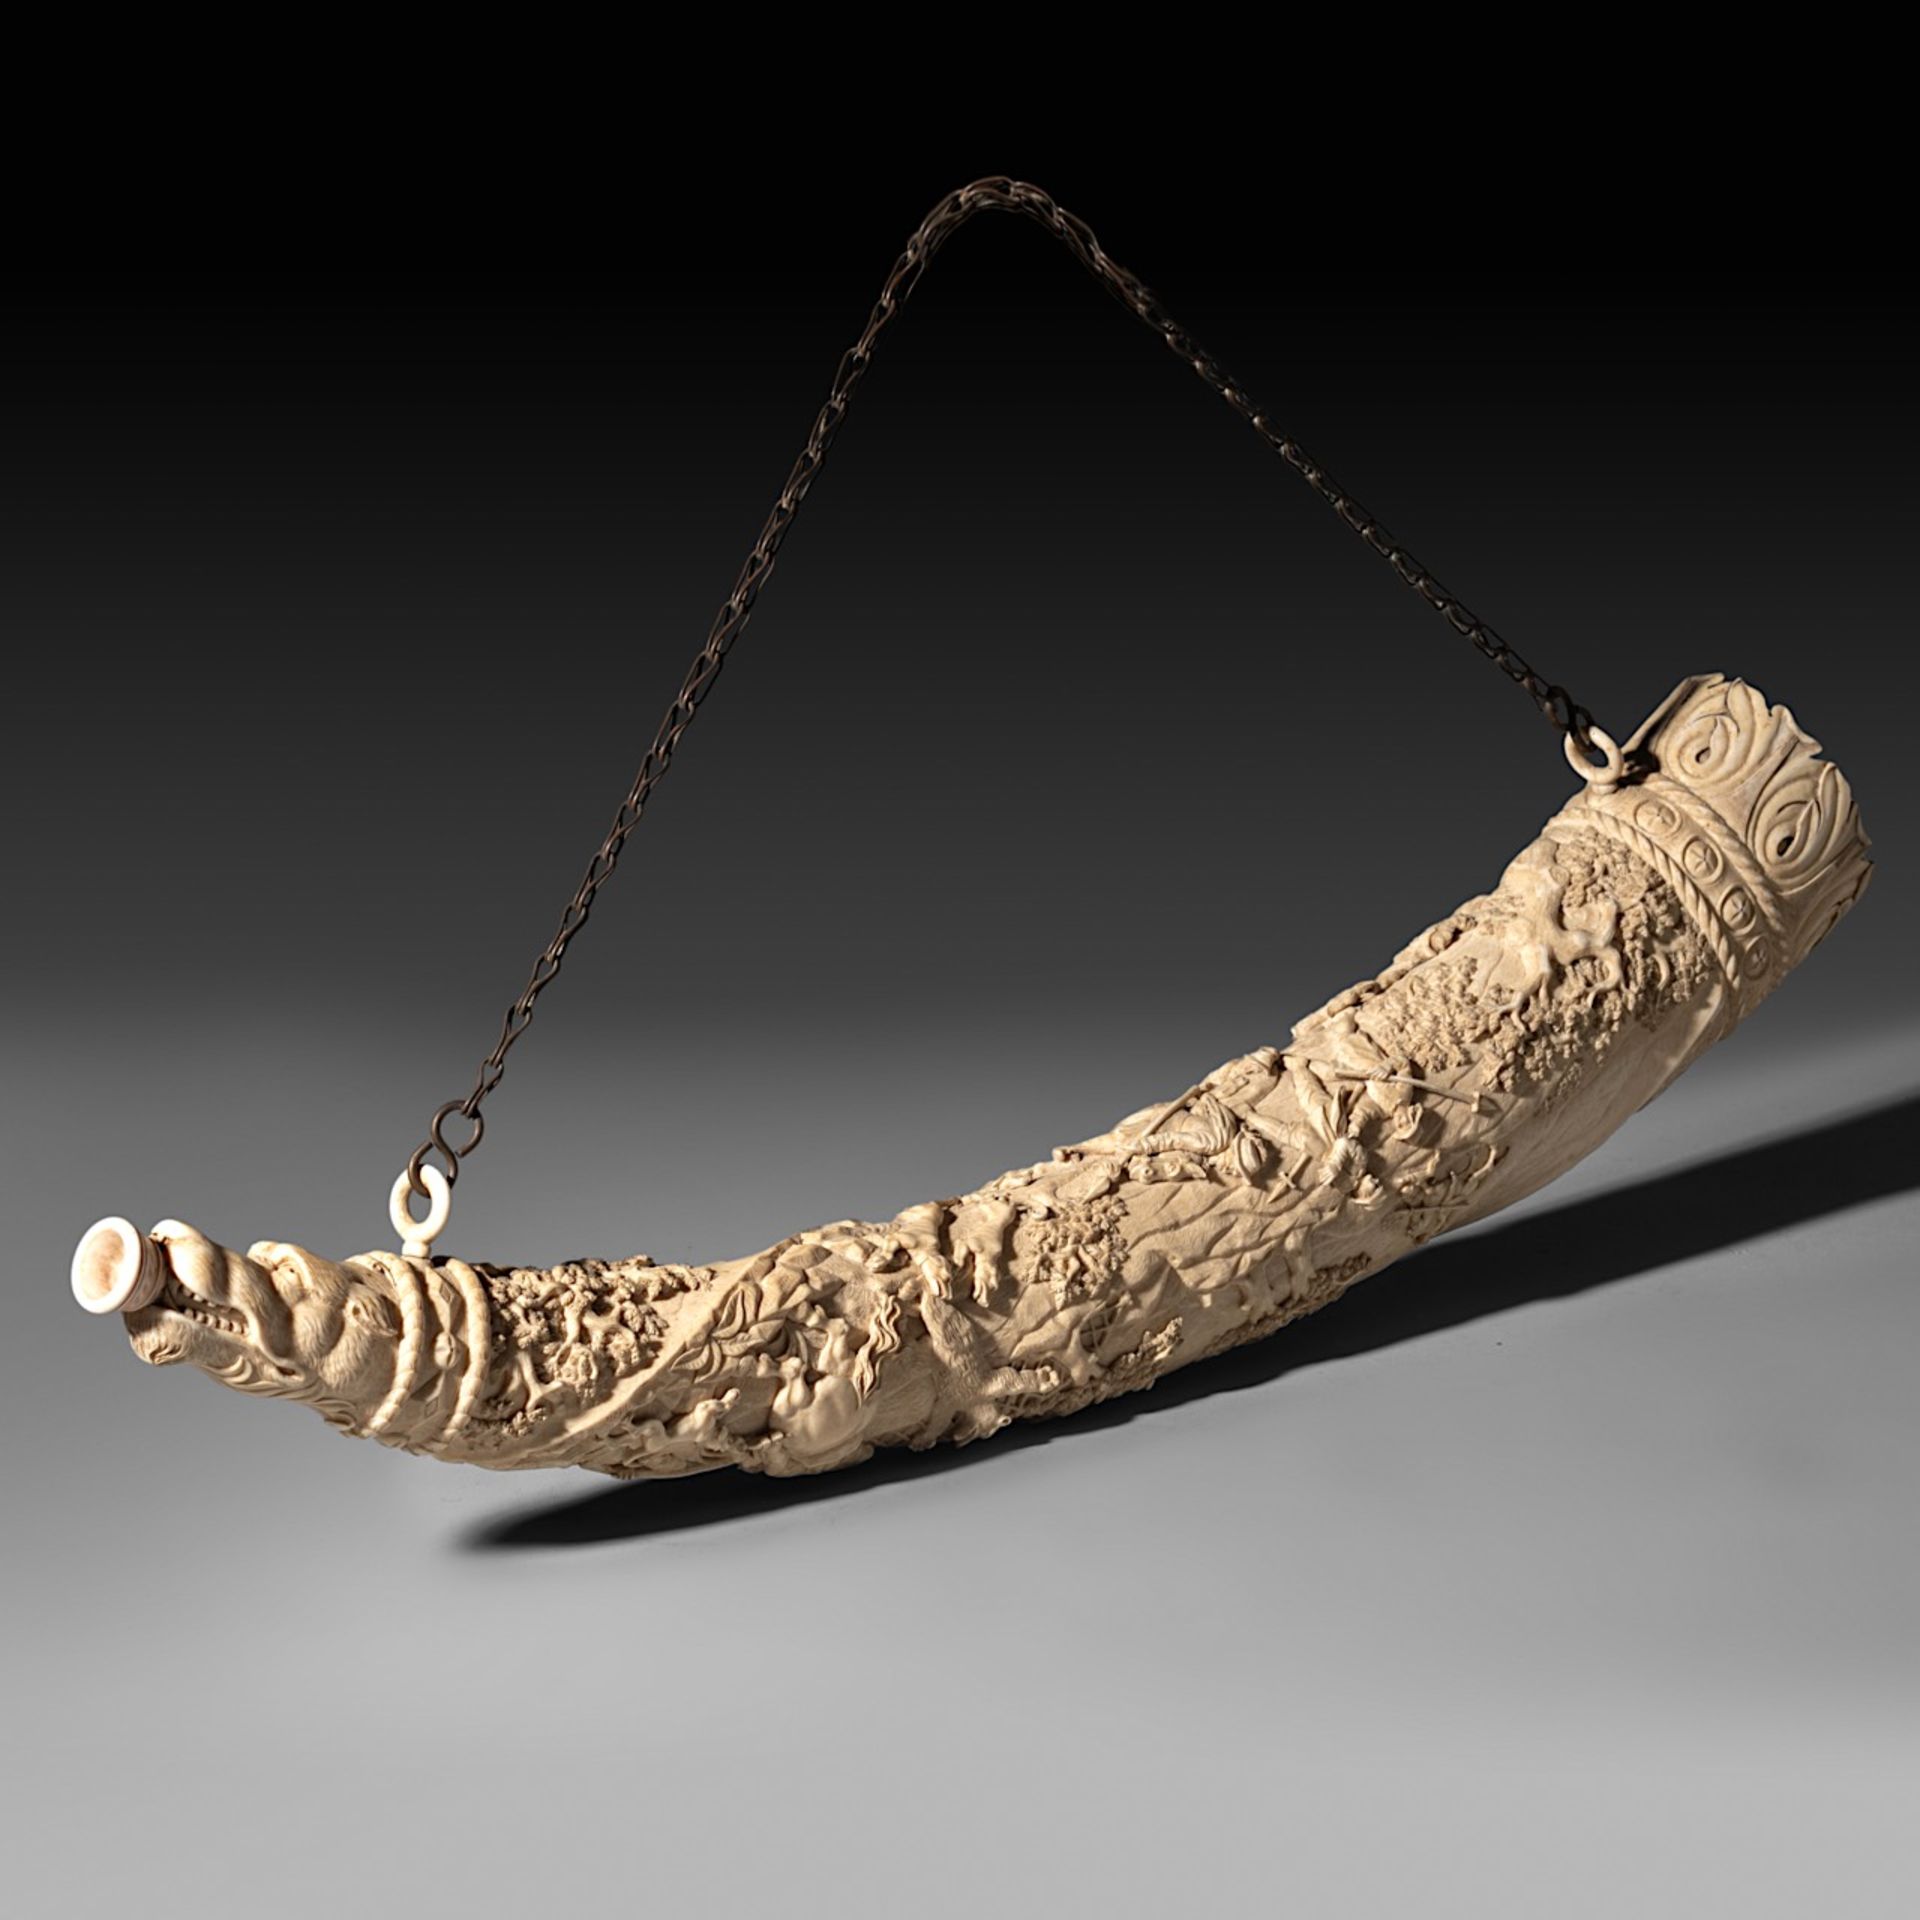 A 19th-century ivory hunting horn, last quarter 19th century, W 74,5 cm - 2850 g (+) - Image 2 of 11